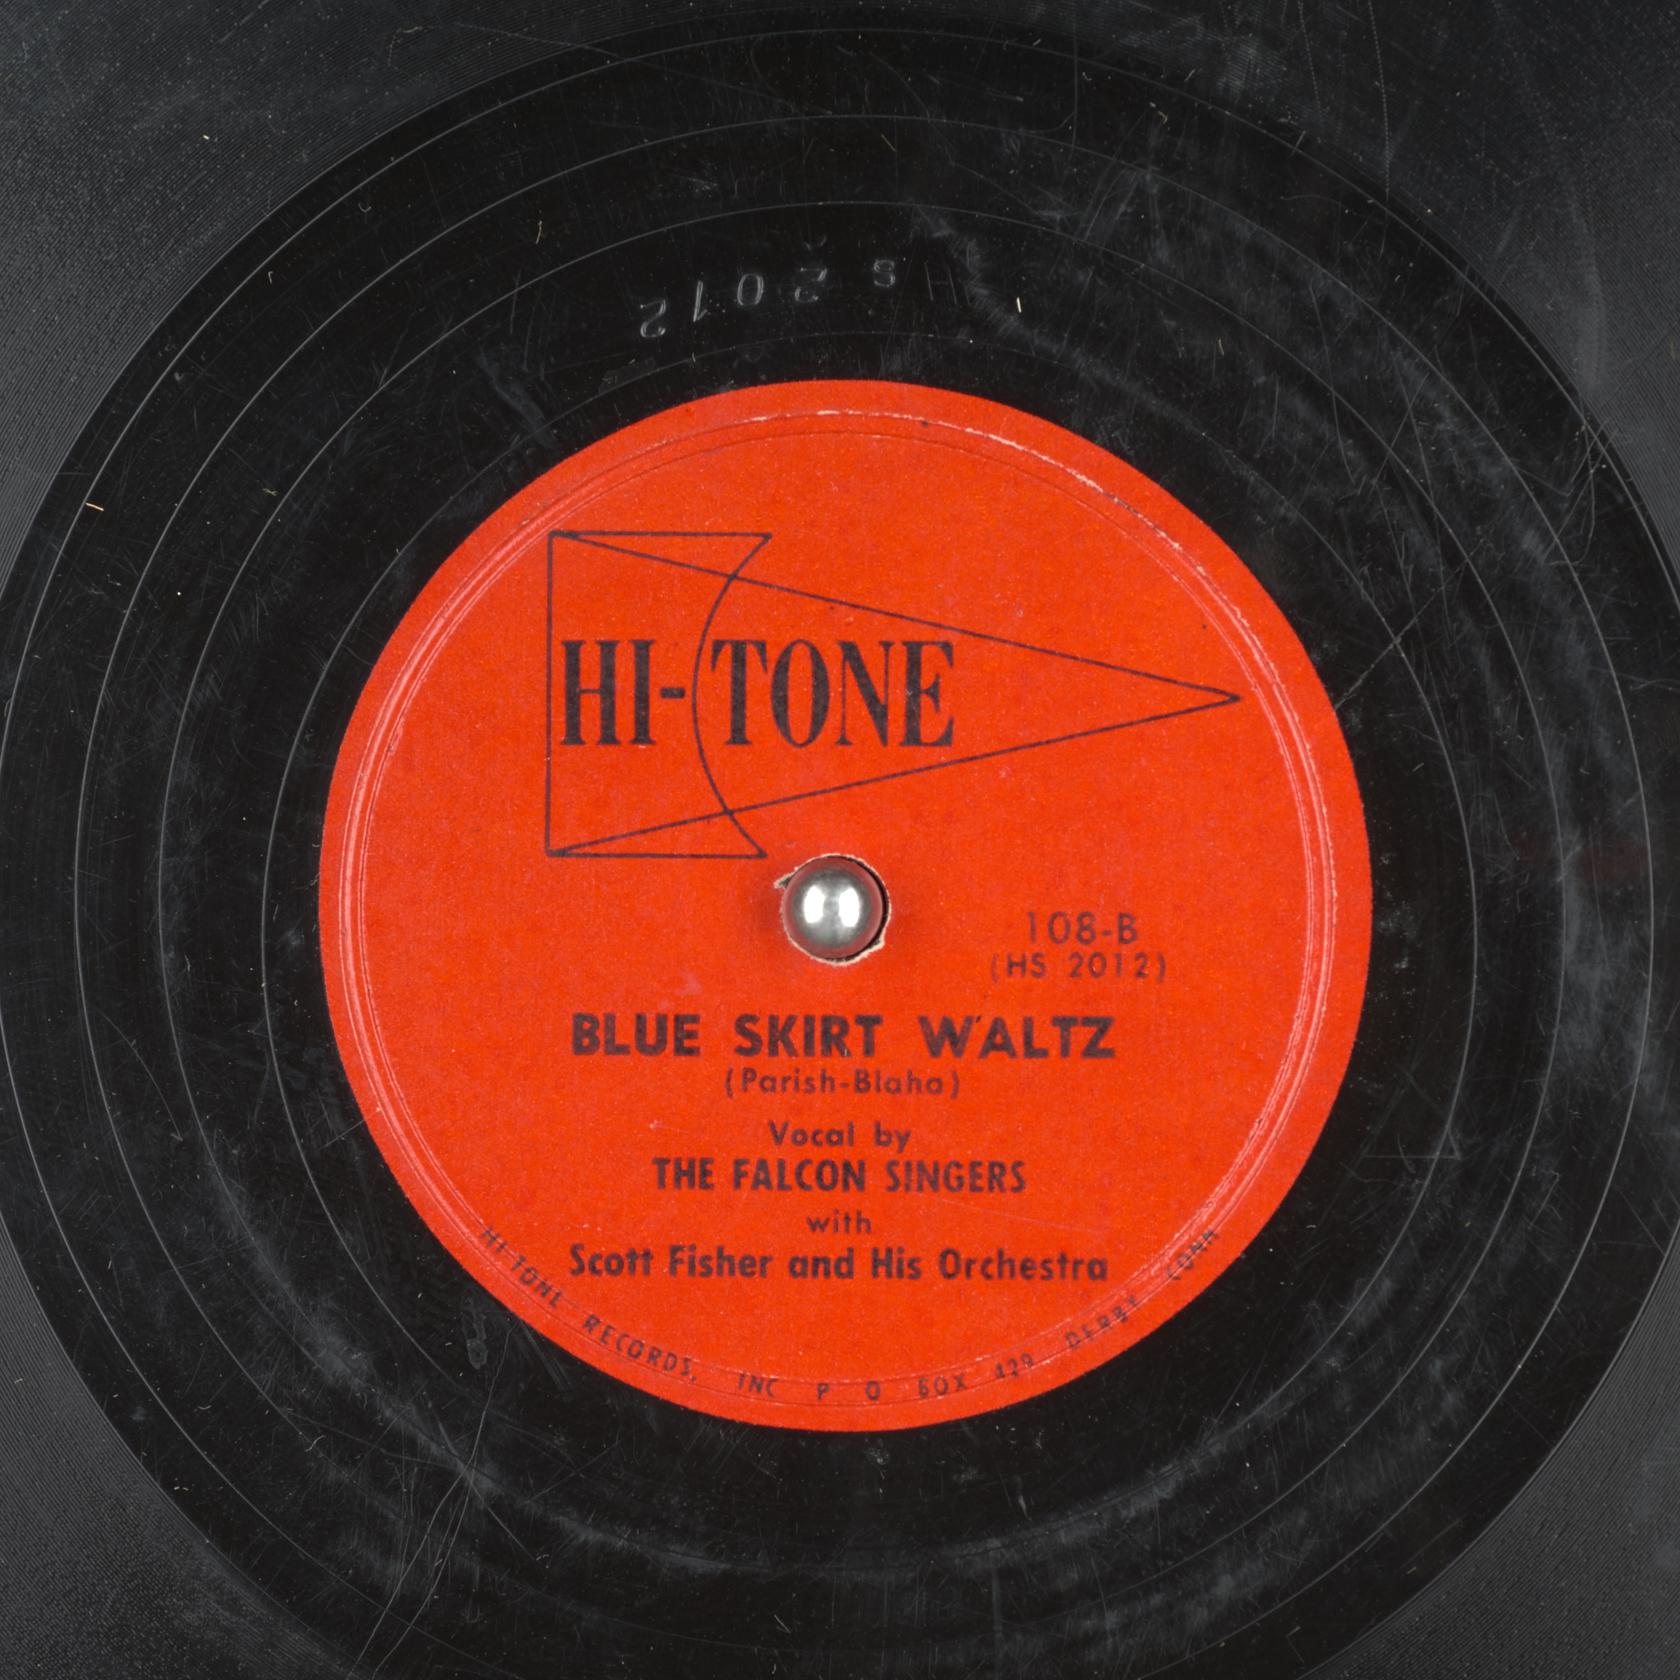 Blue Skirt Waltz - Scott Fisher And His Orchestra